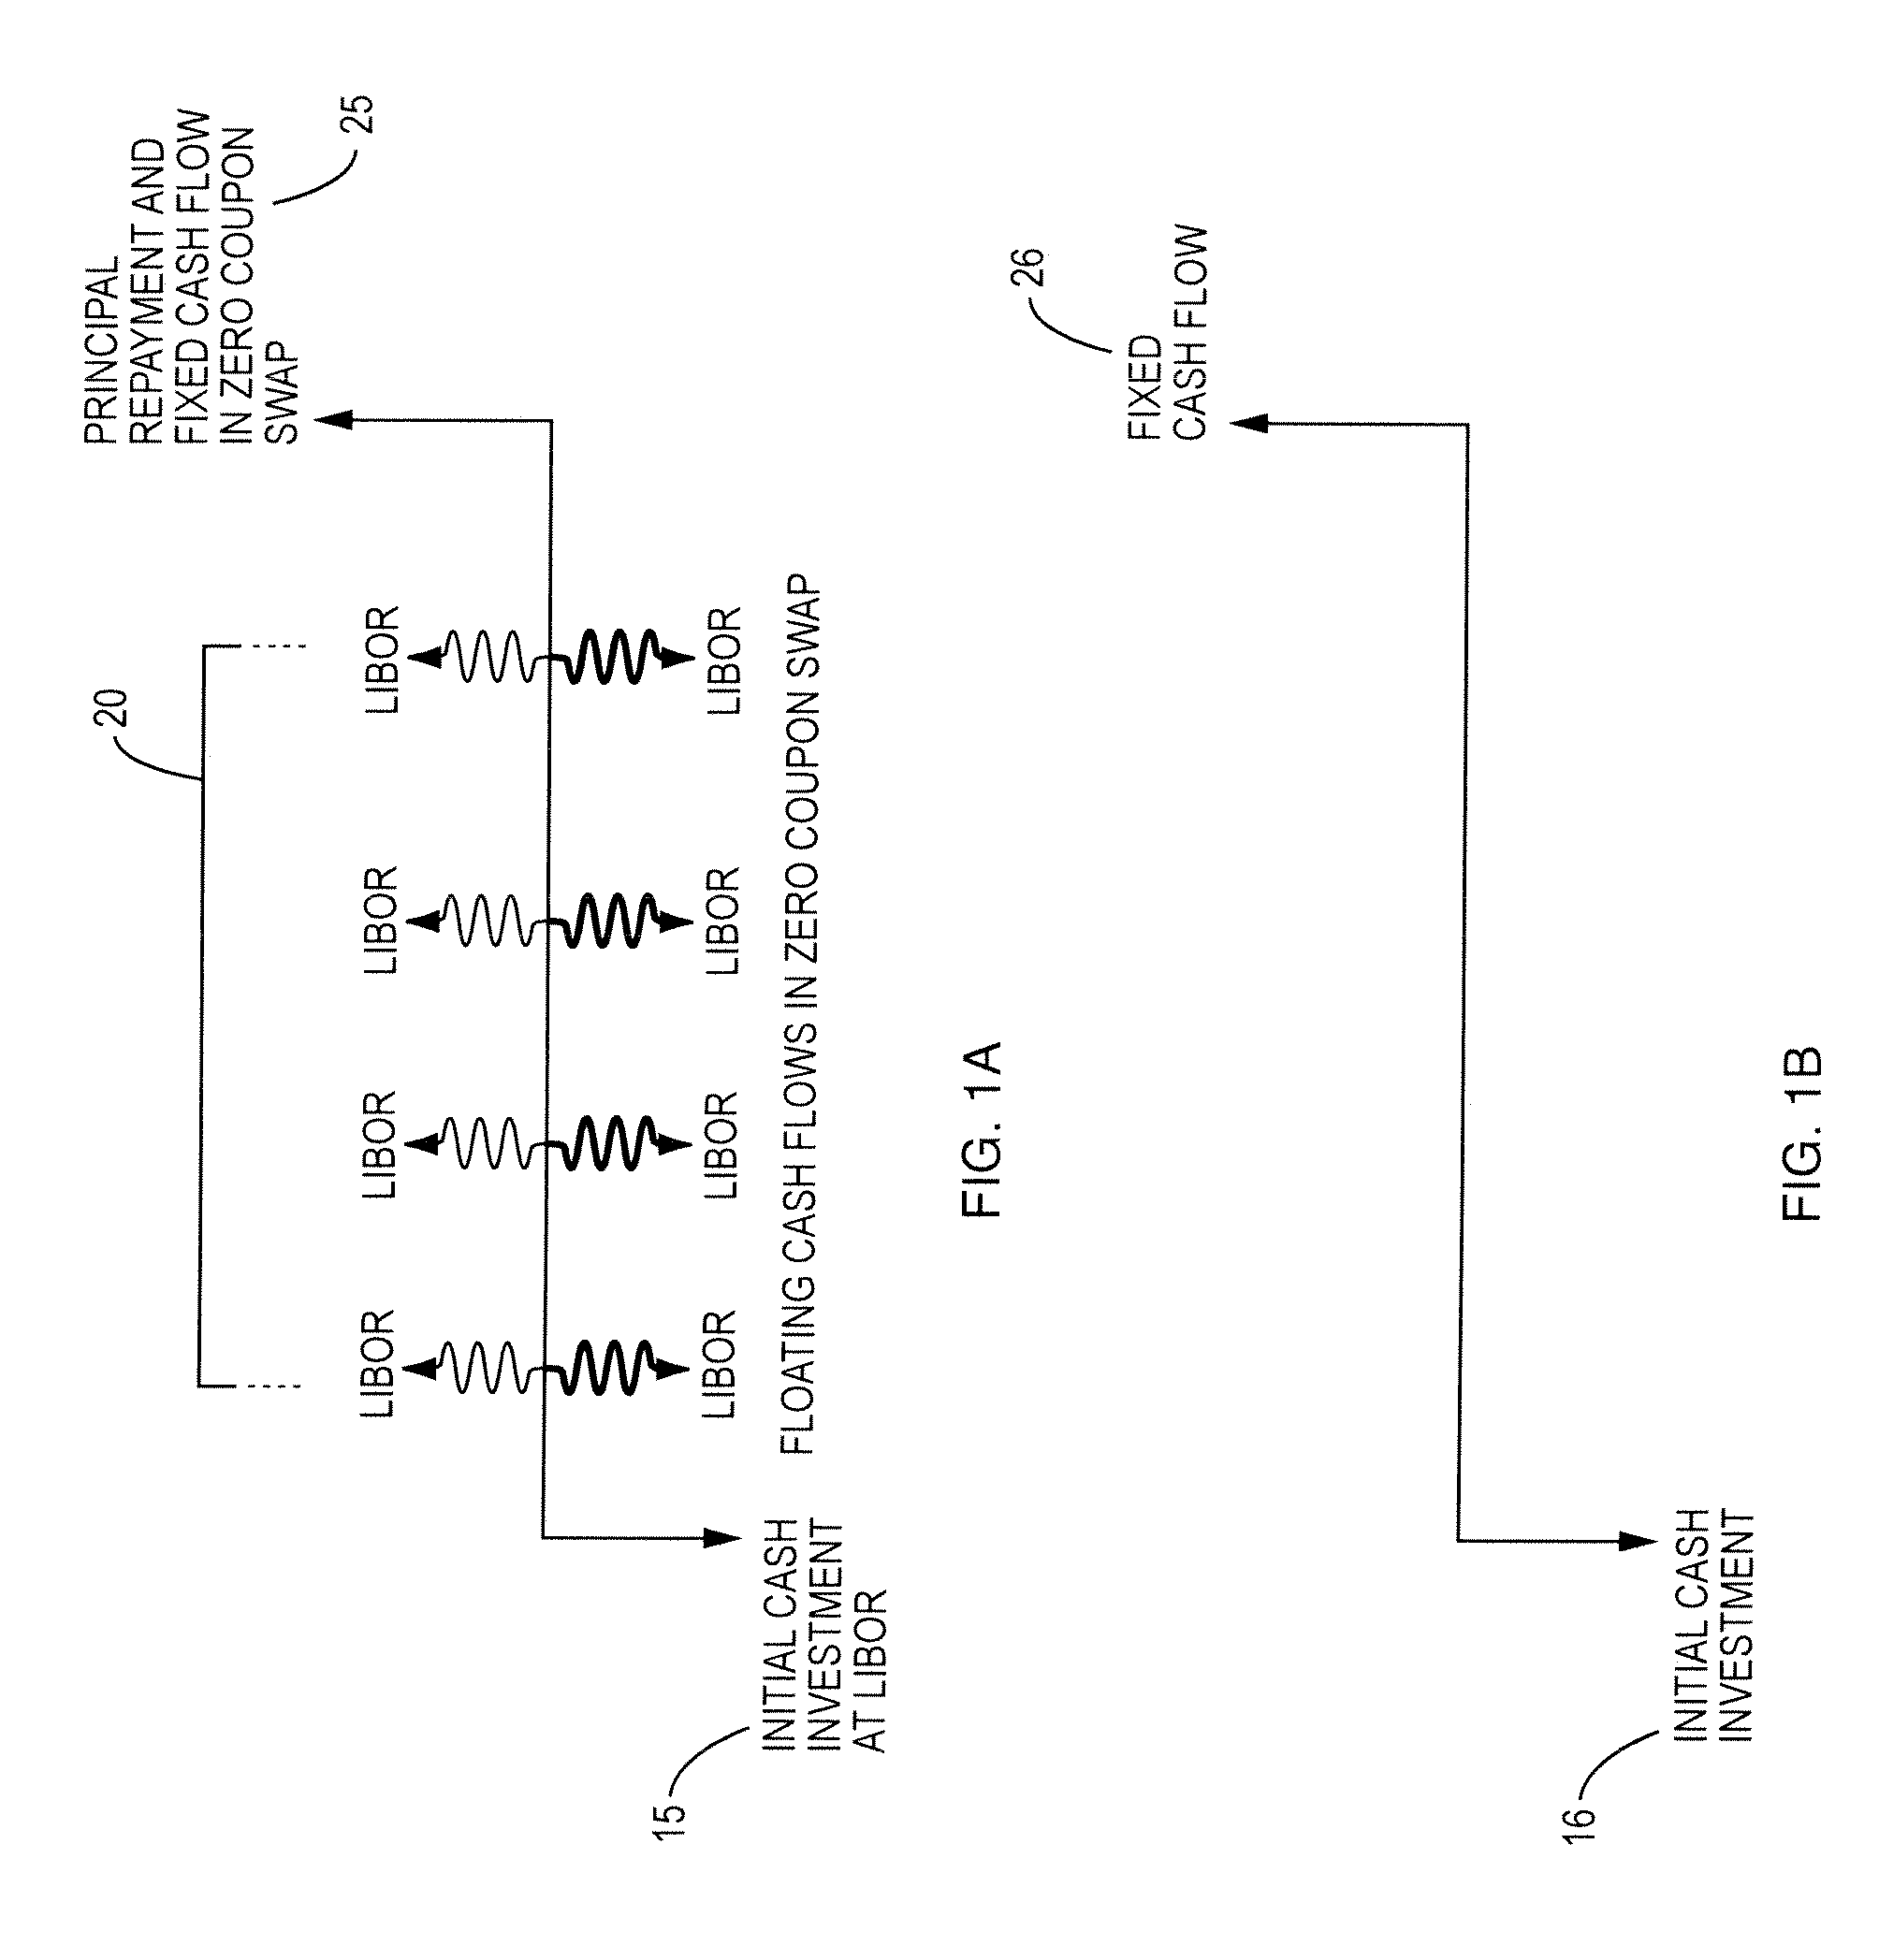 Methods and systems for providing swap indices